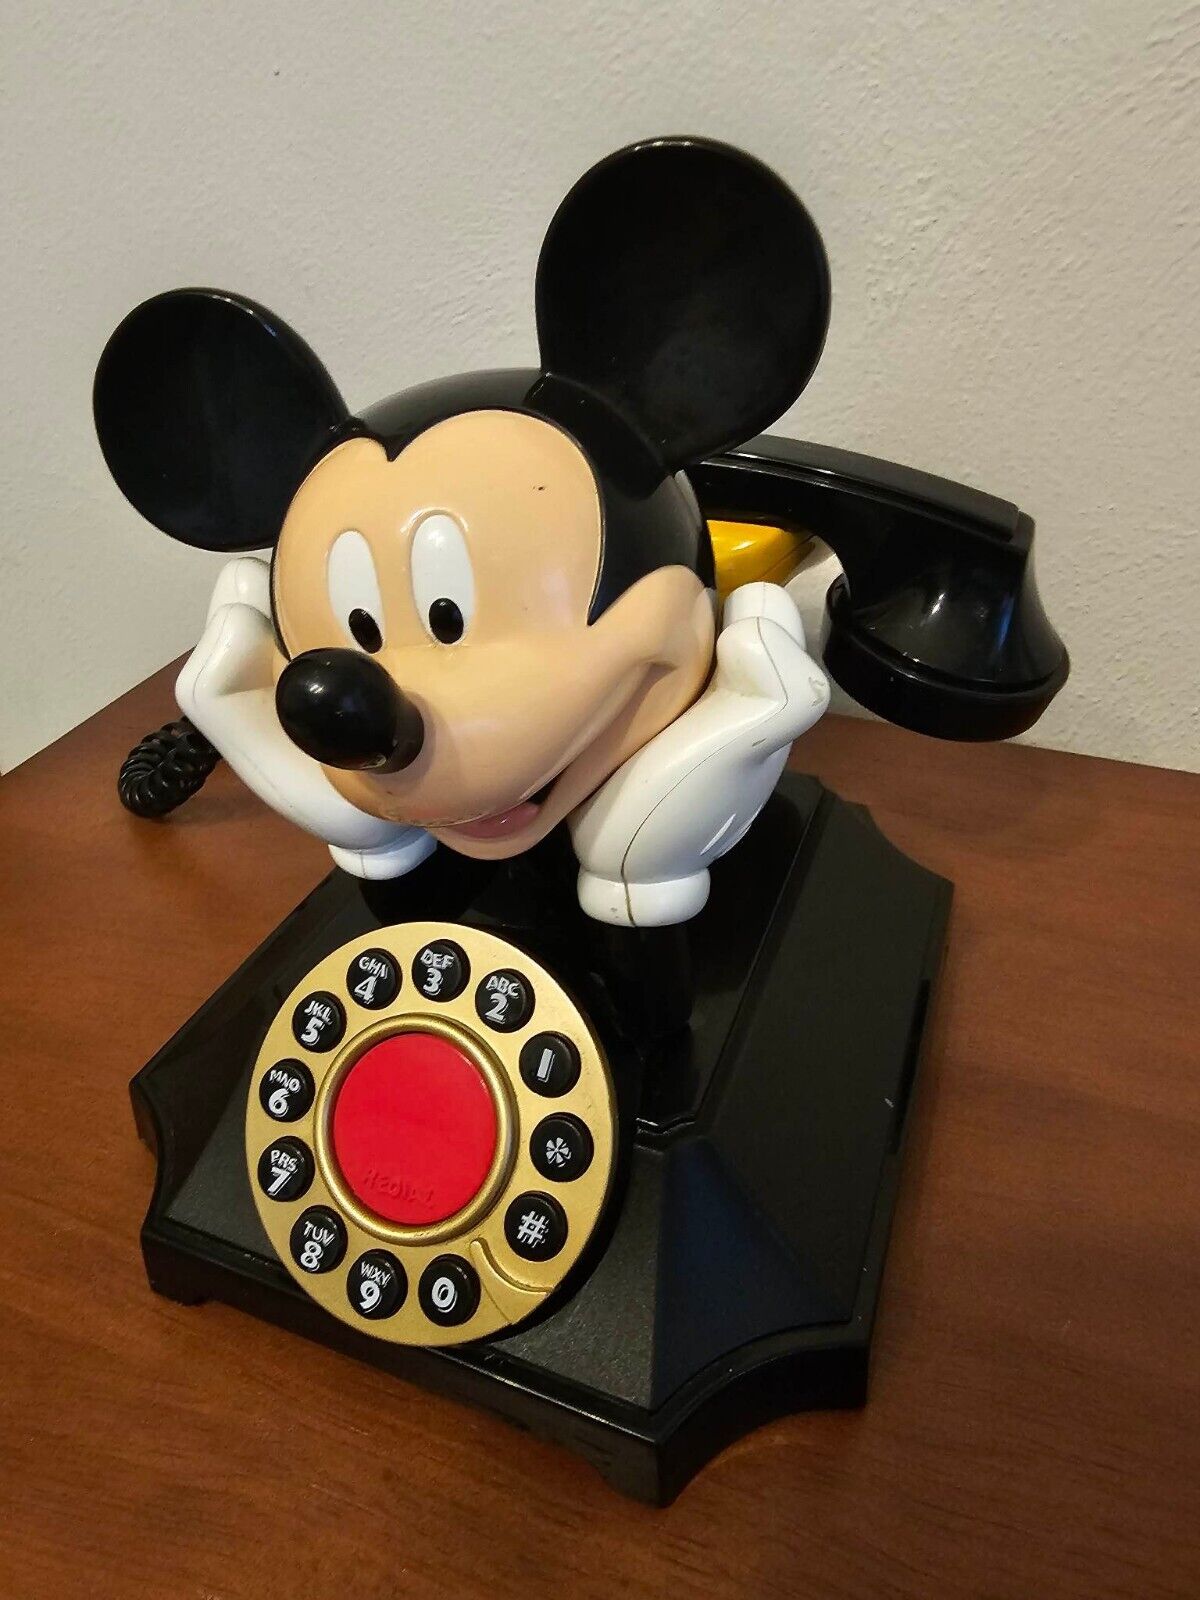 Vintage 1990s Telemania Disney Mickey Mouse Desk Telephone -Push Button-Used